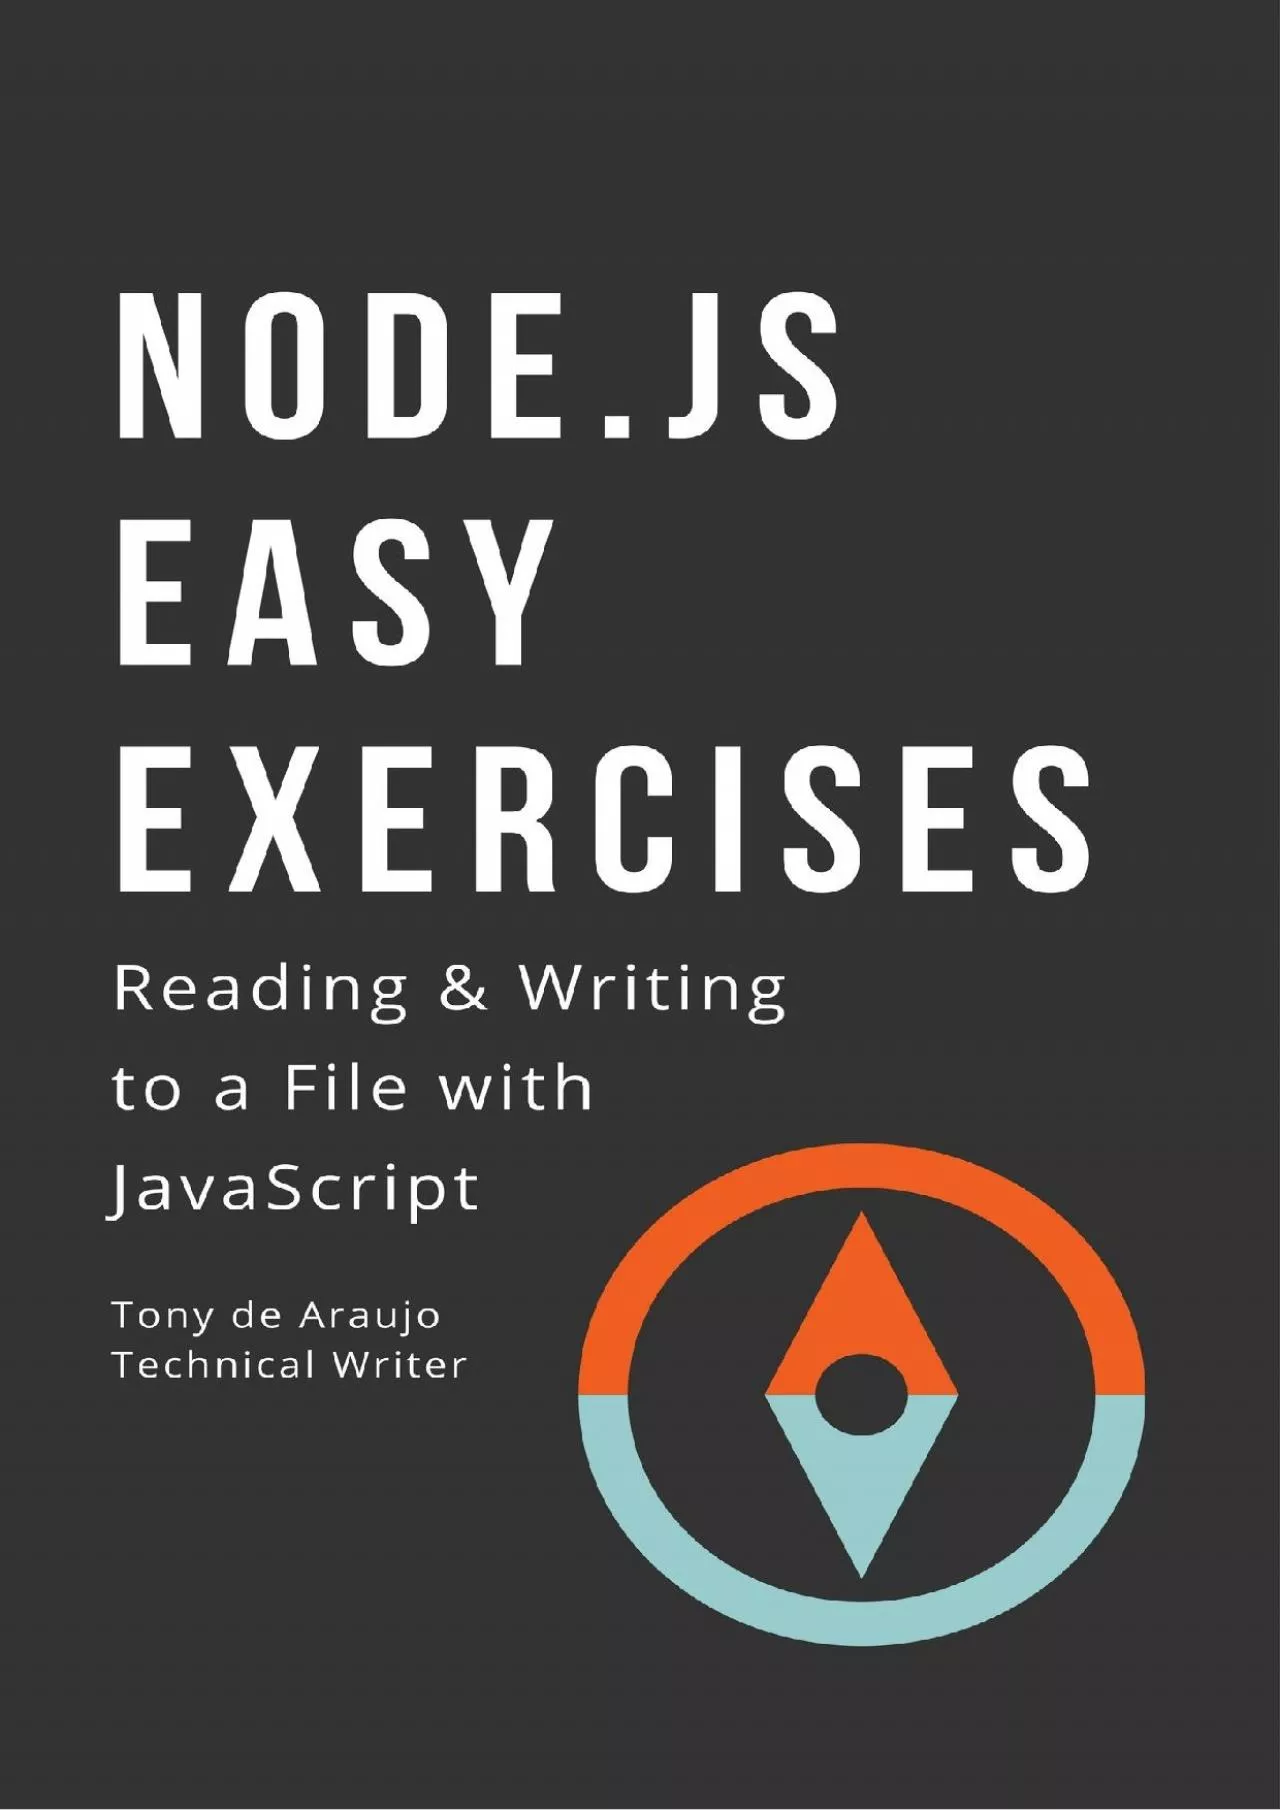 (DOWNLOAD)-NODE.js Easy Exercises: READING & WRITING to a File with JavaScript (Programming